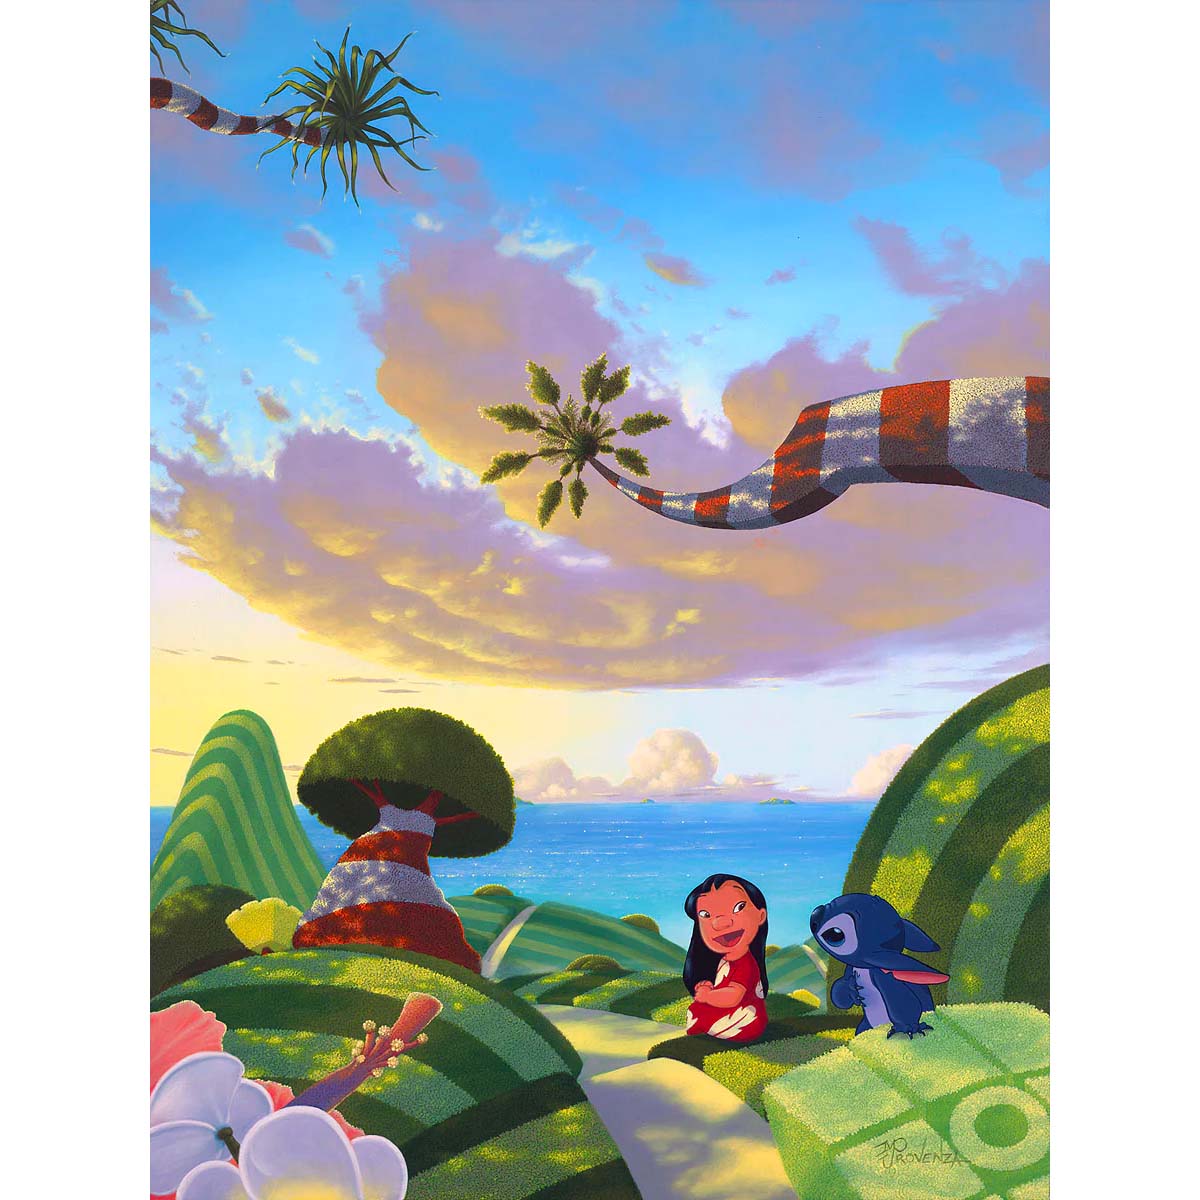 Michael Provenza Disney "A Tropical Idea" Limited Edition Canvas Giclee